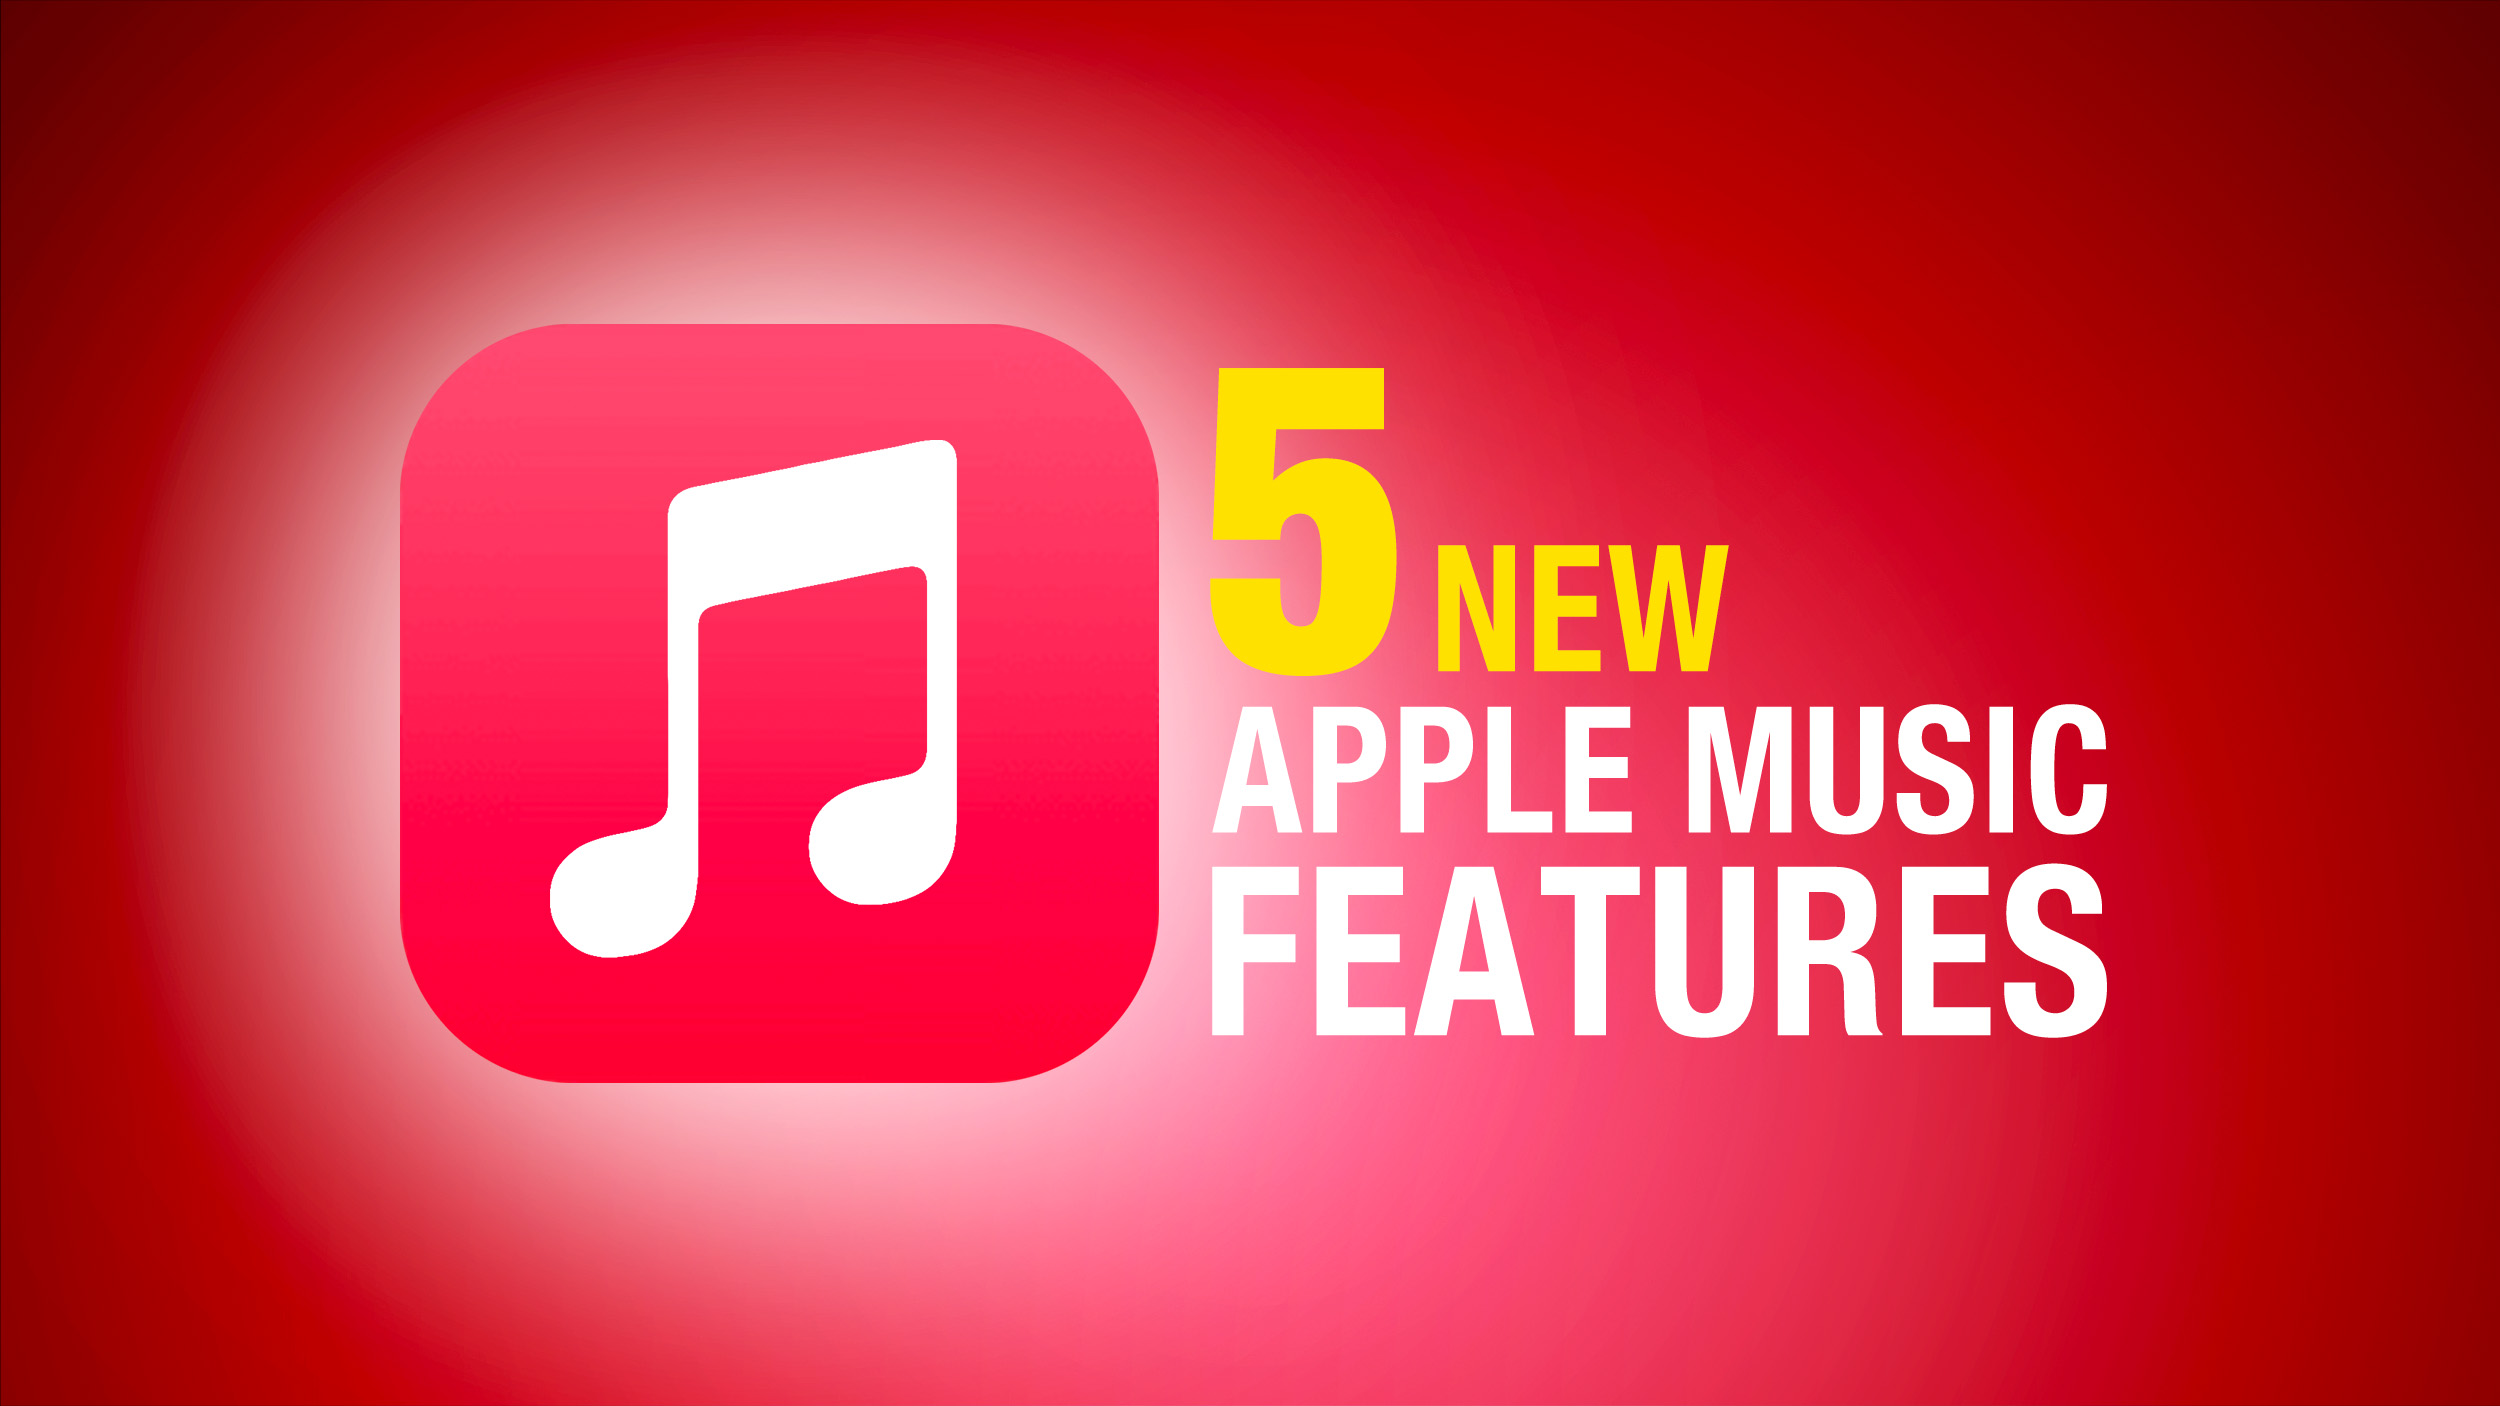 5-New-Apple-Music-Features-Feature-1.jpg